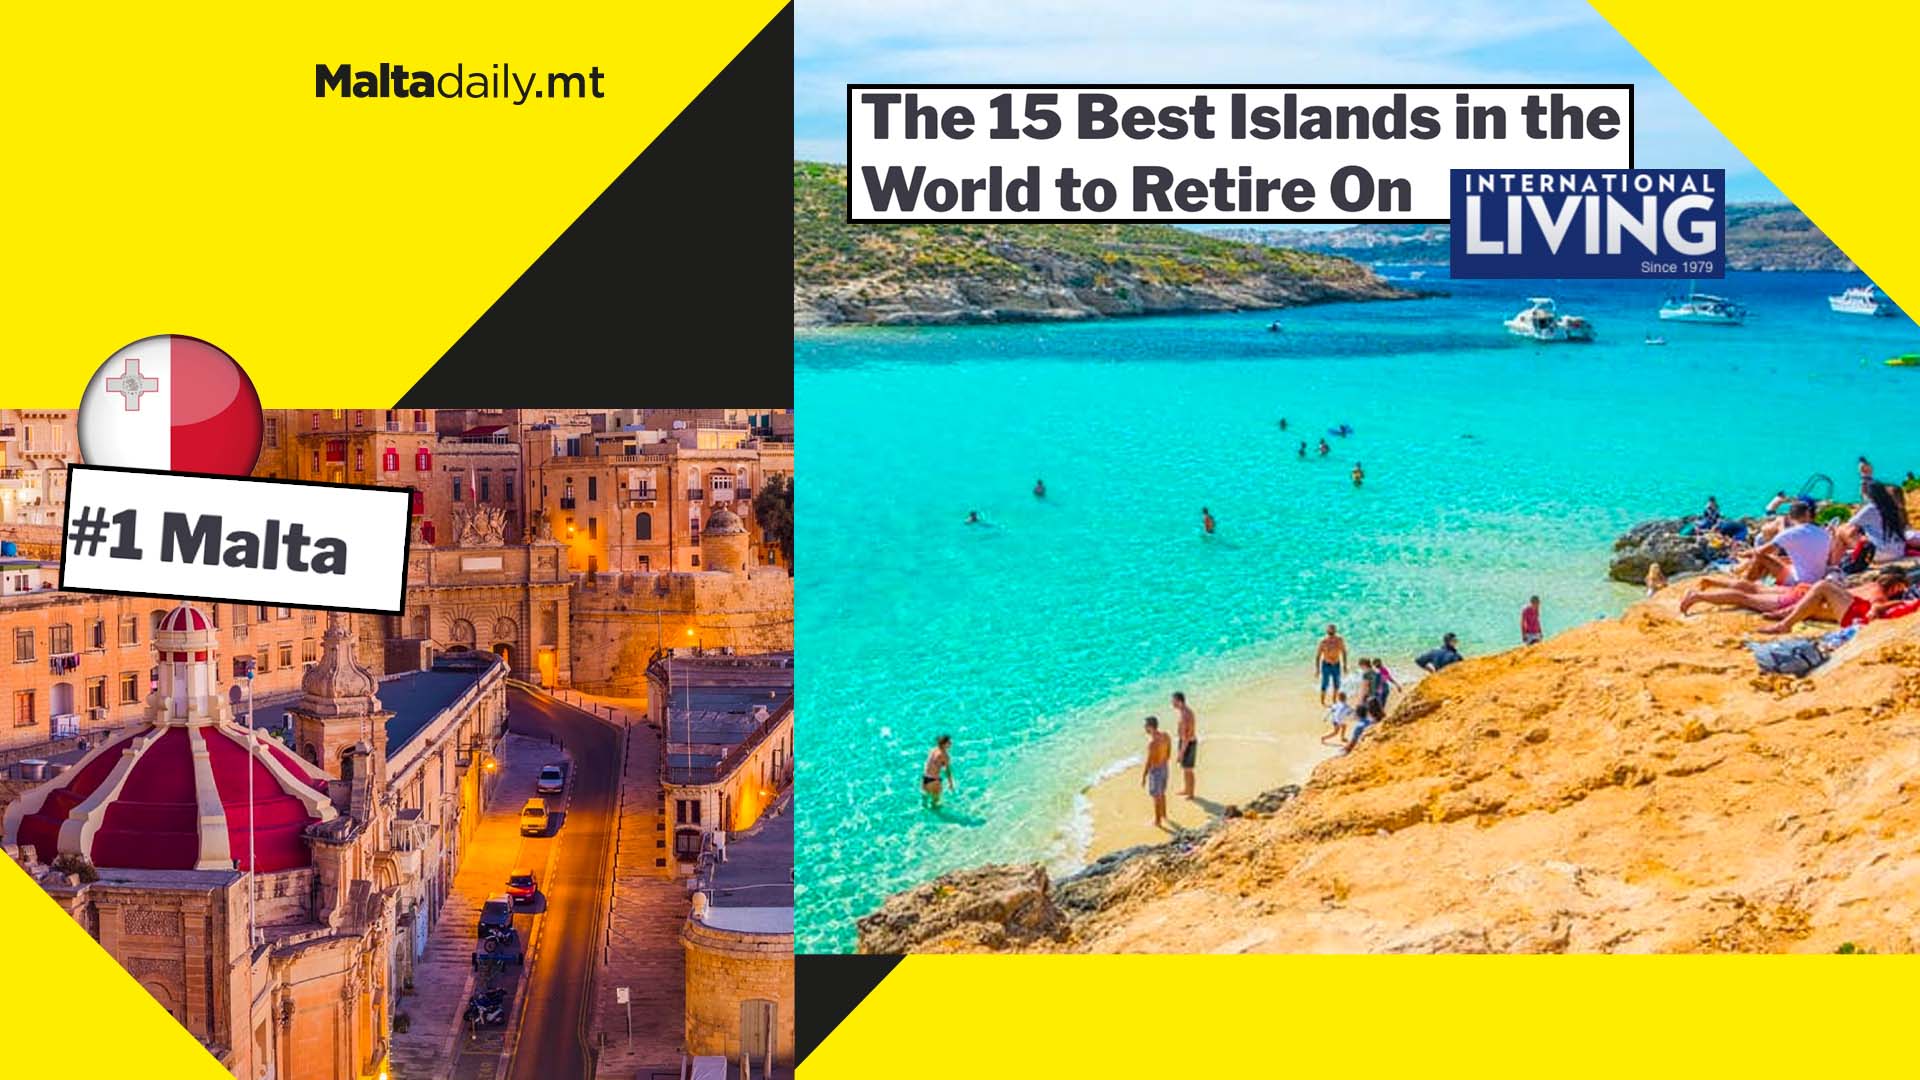 Malta named one of the 15 best islands to retire on around the world